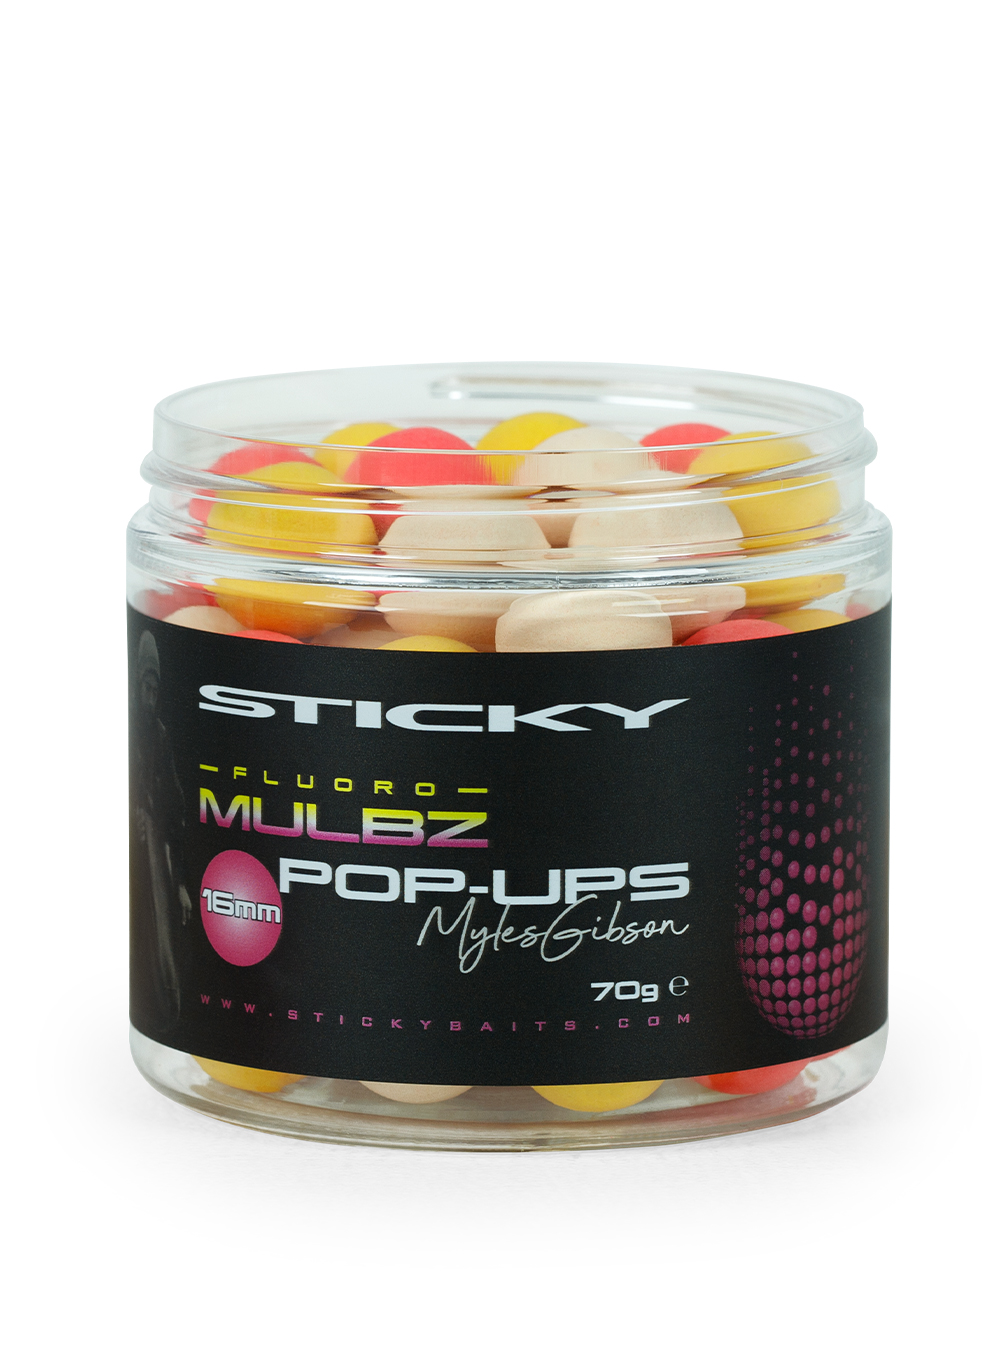 Sticky Baits Mulbz Fluoro Mixed Pop Ups - Click Image to Close